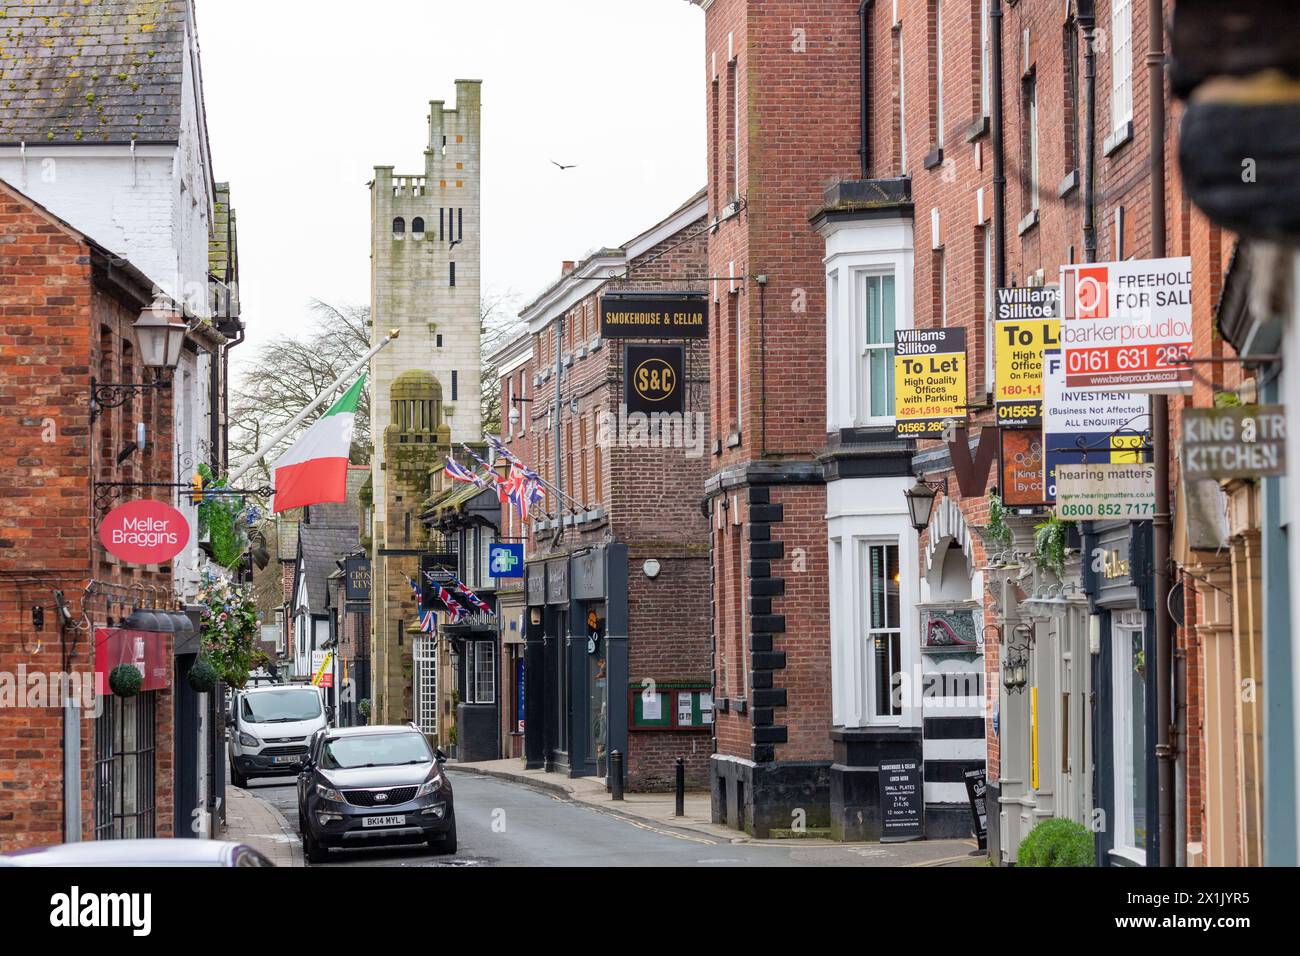 Early morning on King Street in Knutsford, Cheshire,England Stock Photo